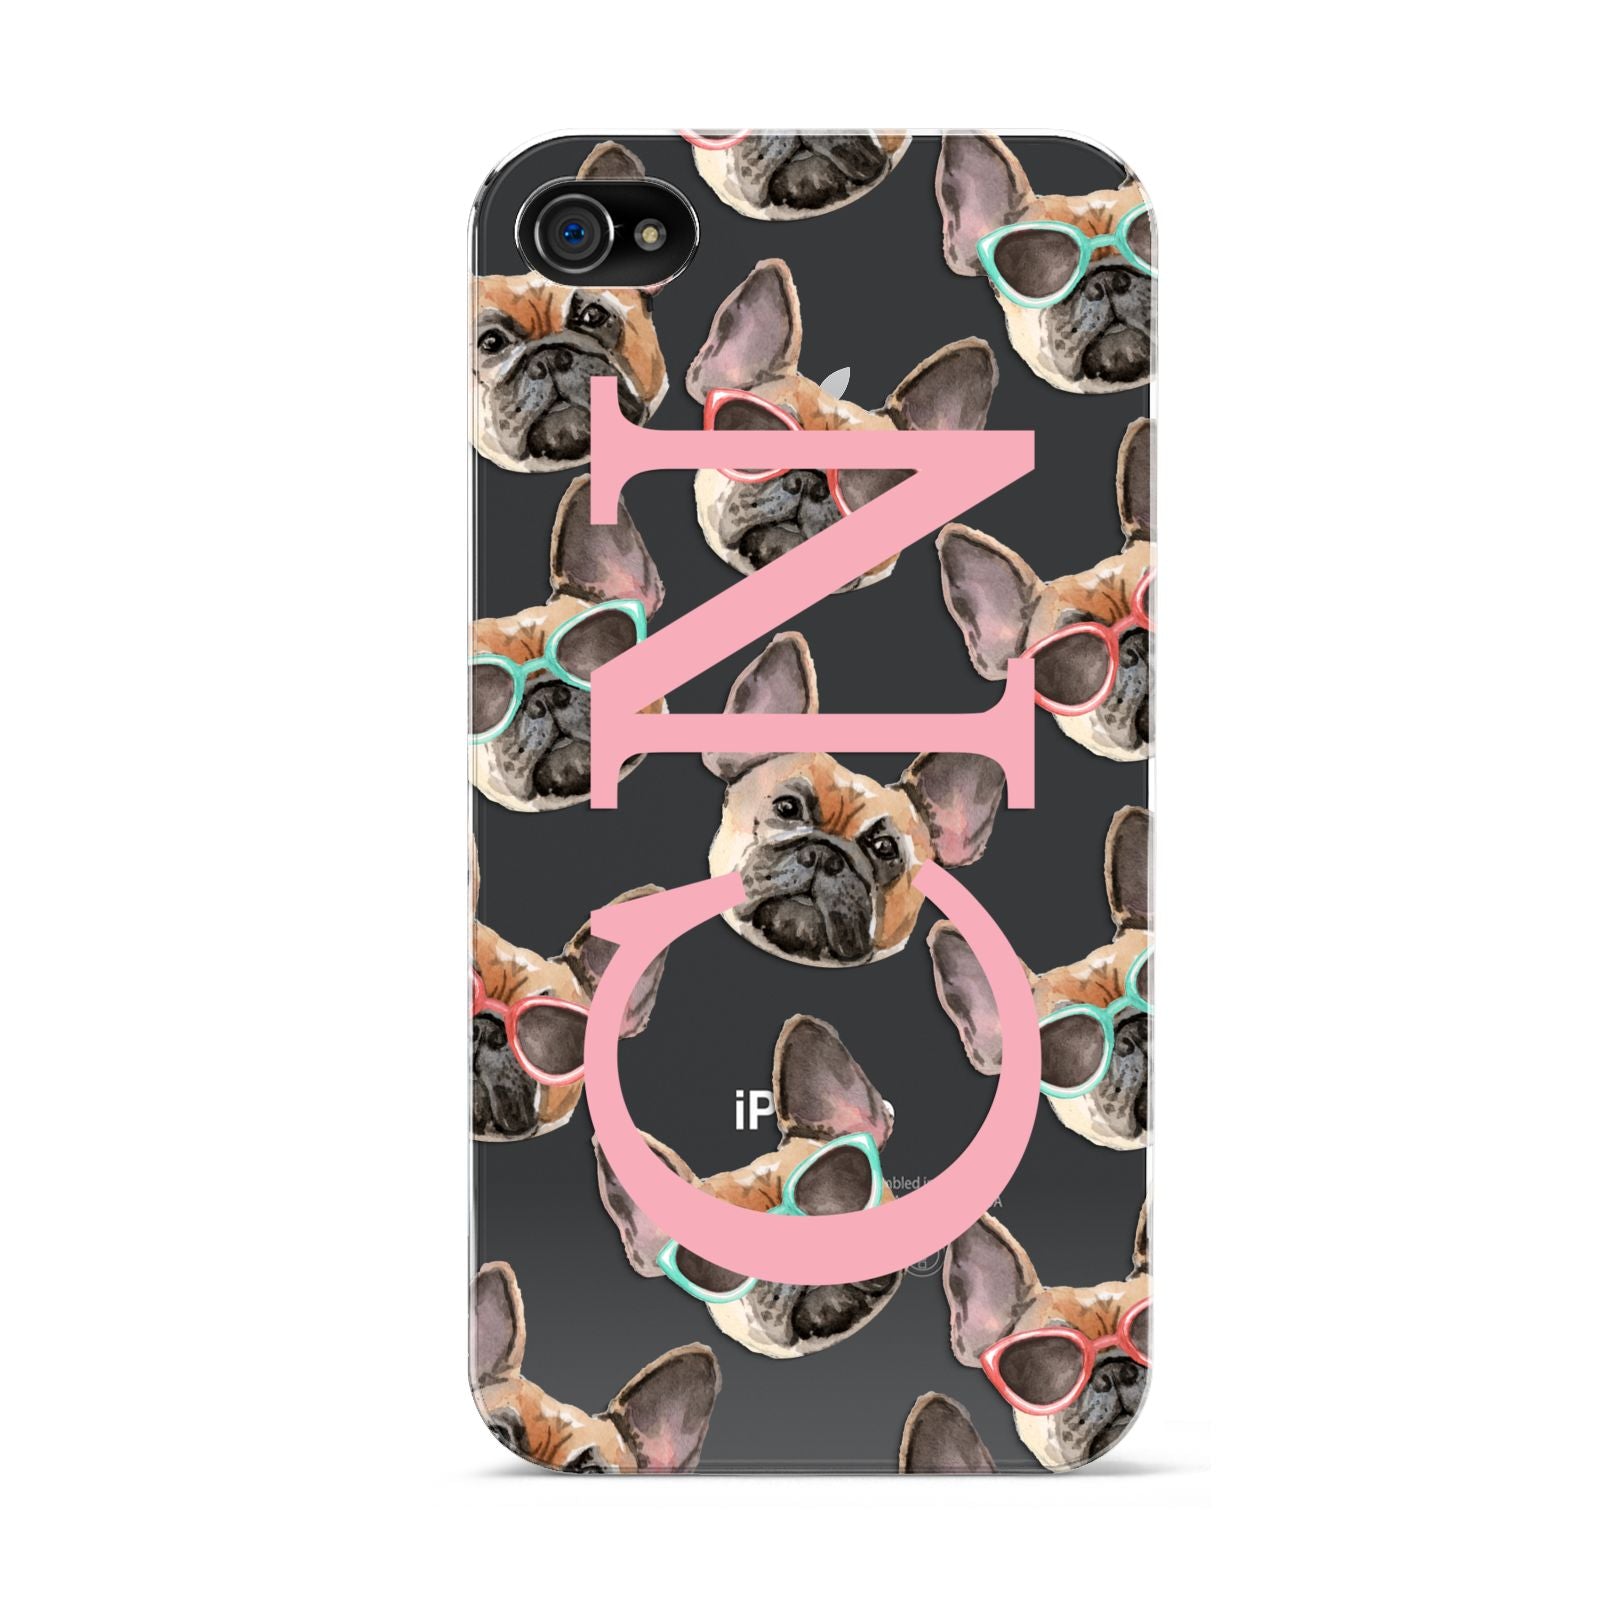 Monogrammed French Bulldog Apple iPhone 4s Case